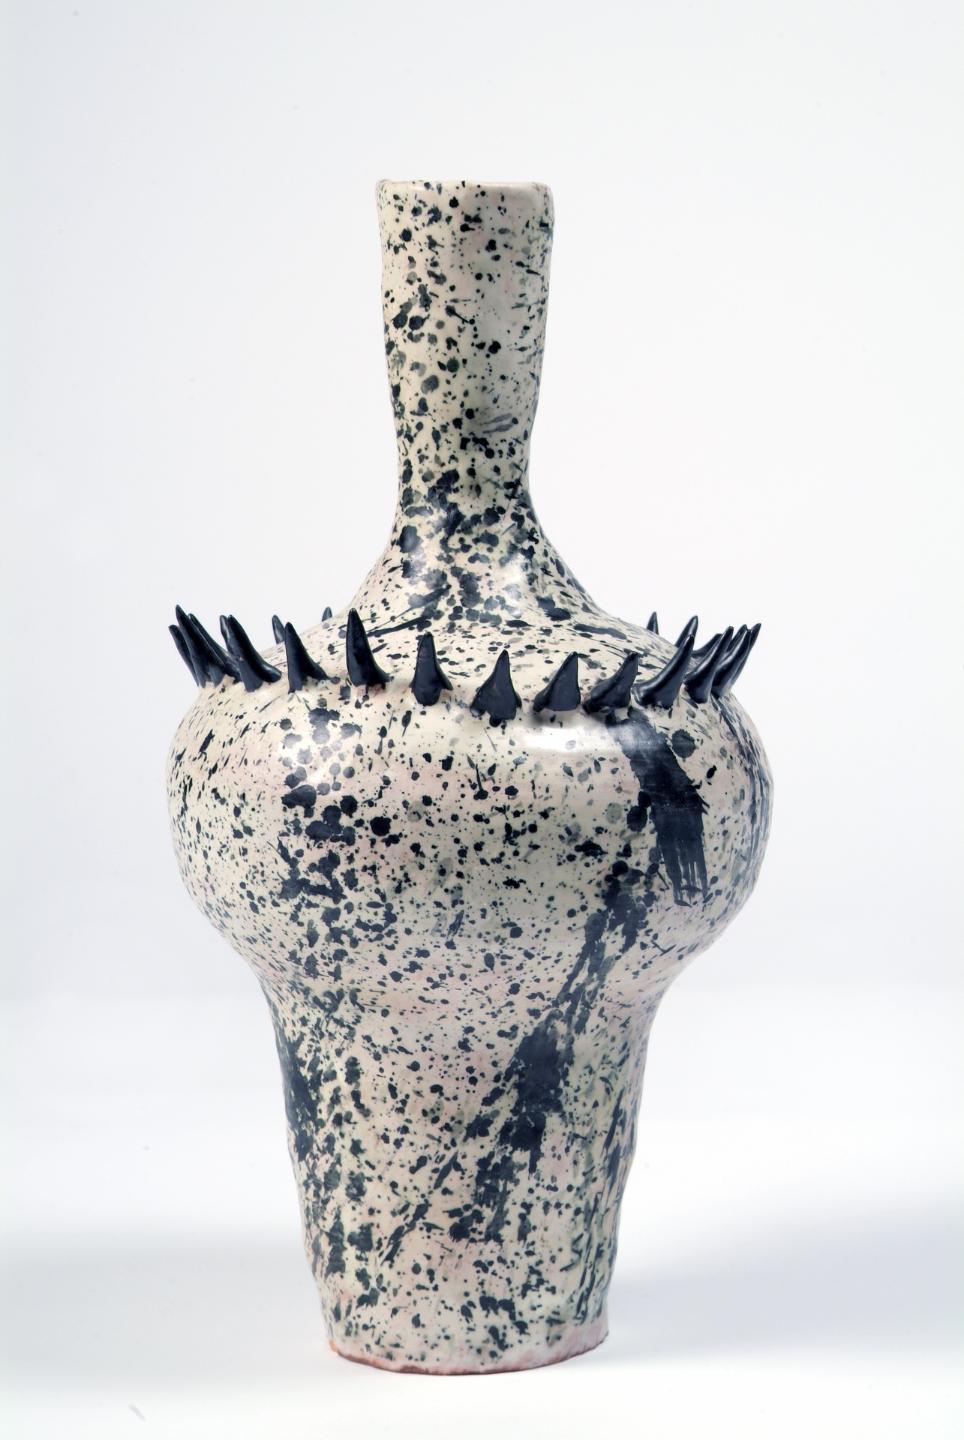 John Ffrench, Vase (green with black and grey speckled markings), 1960, ceramic, 28 x 6.5 cm. Presented, 1990. © the artist’s estate.